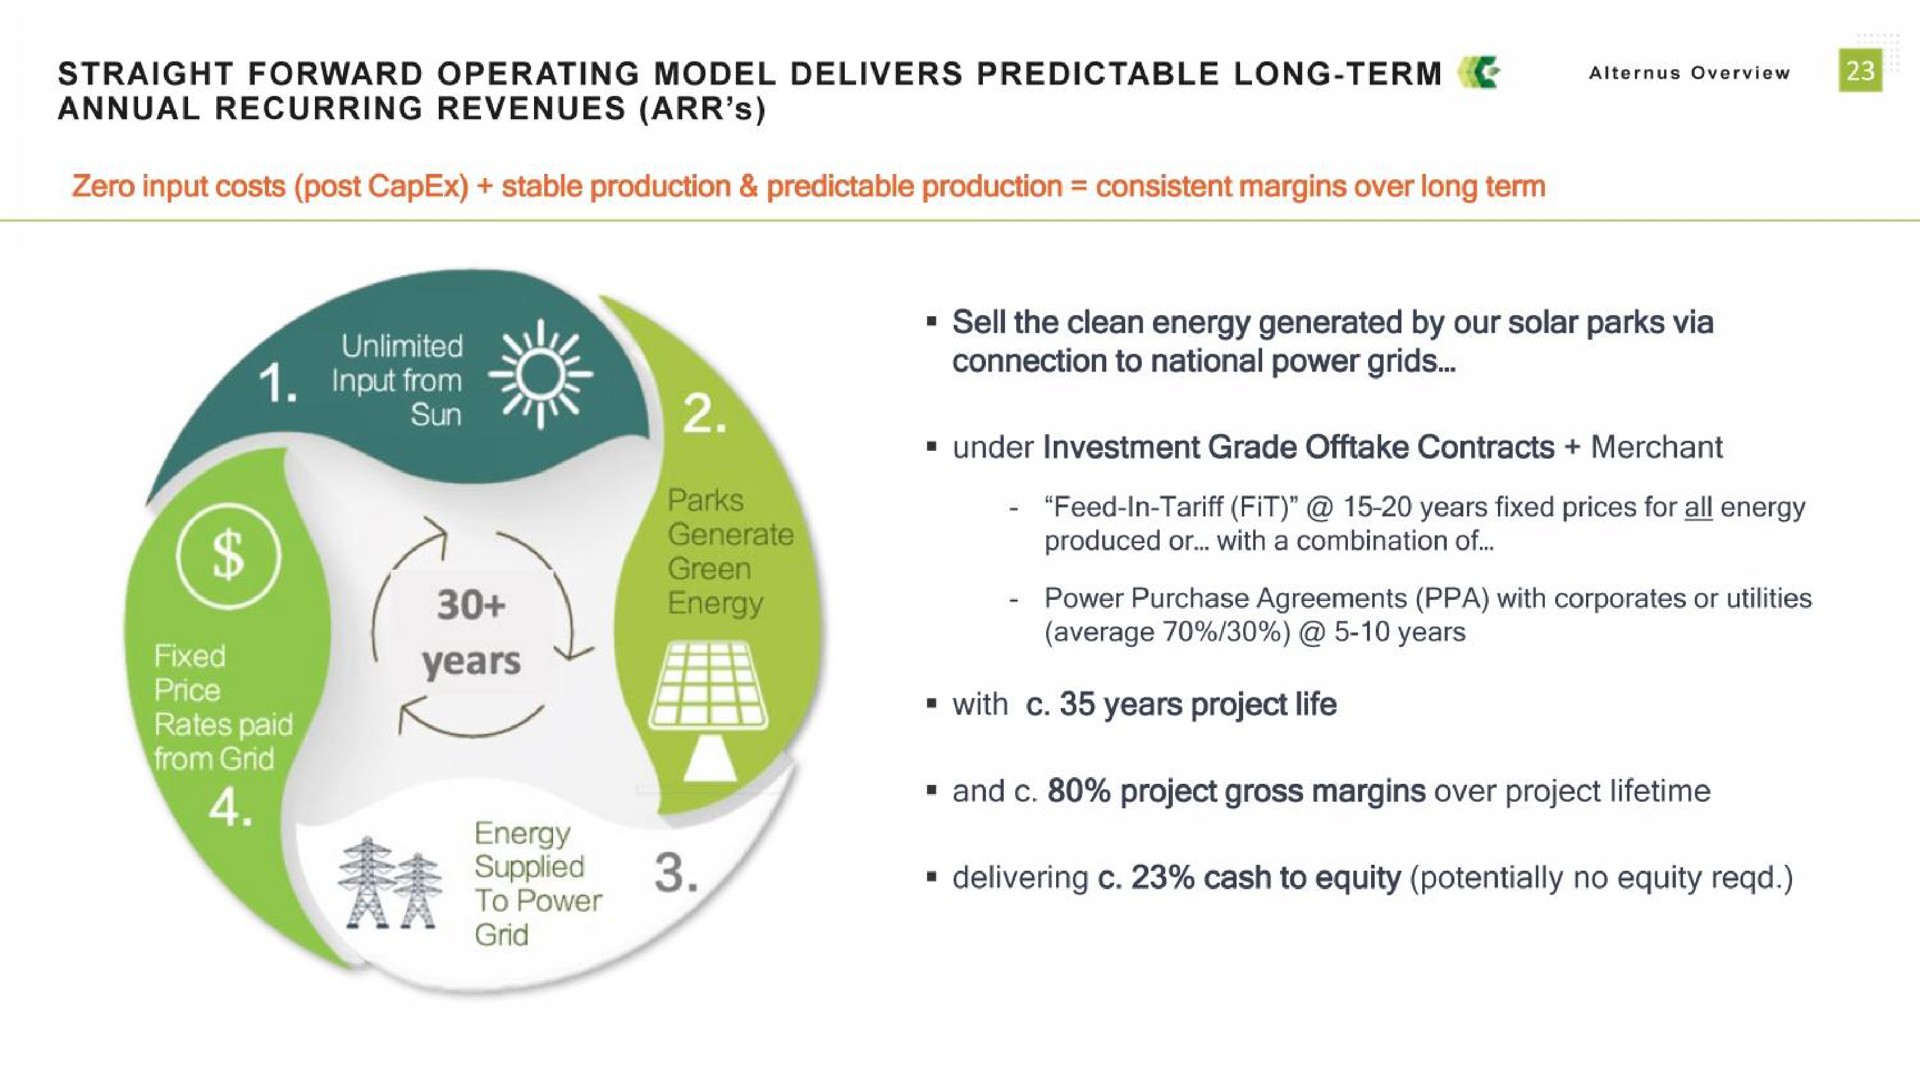 straight forward operating model delivers predictable long term annual recurring revenues overview an colt sell the clean energy generated by our solar parks via connection to national power grids pet from grid with years project life and project gross margins over project lifetime supplied delivering cash to equity potentially no equity deliver | Alternus Energy